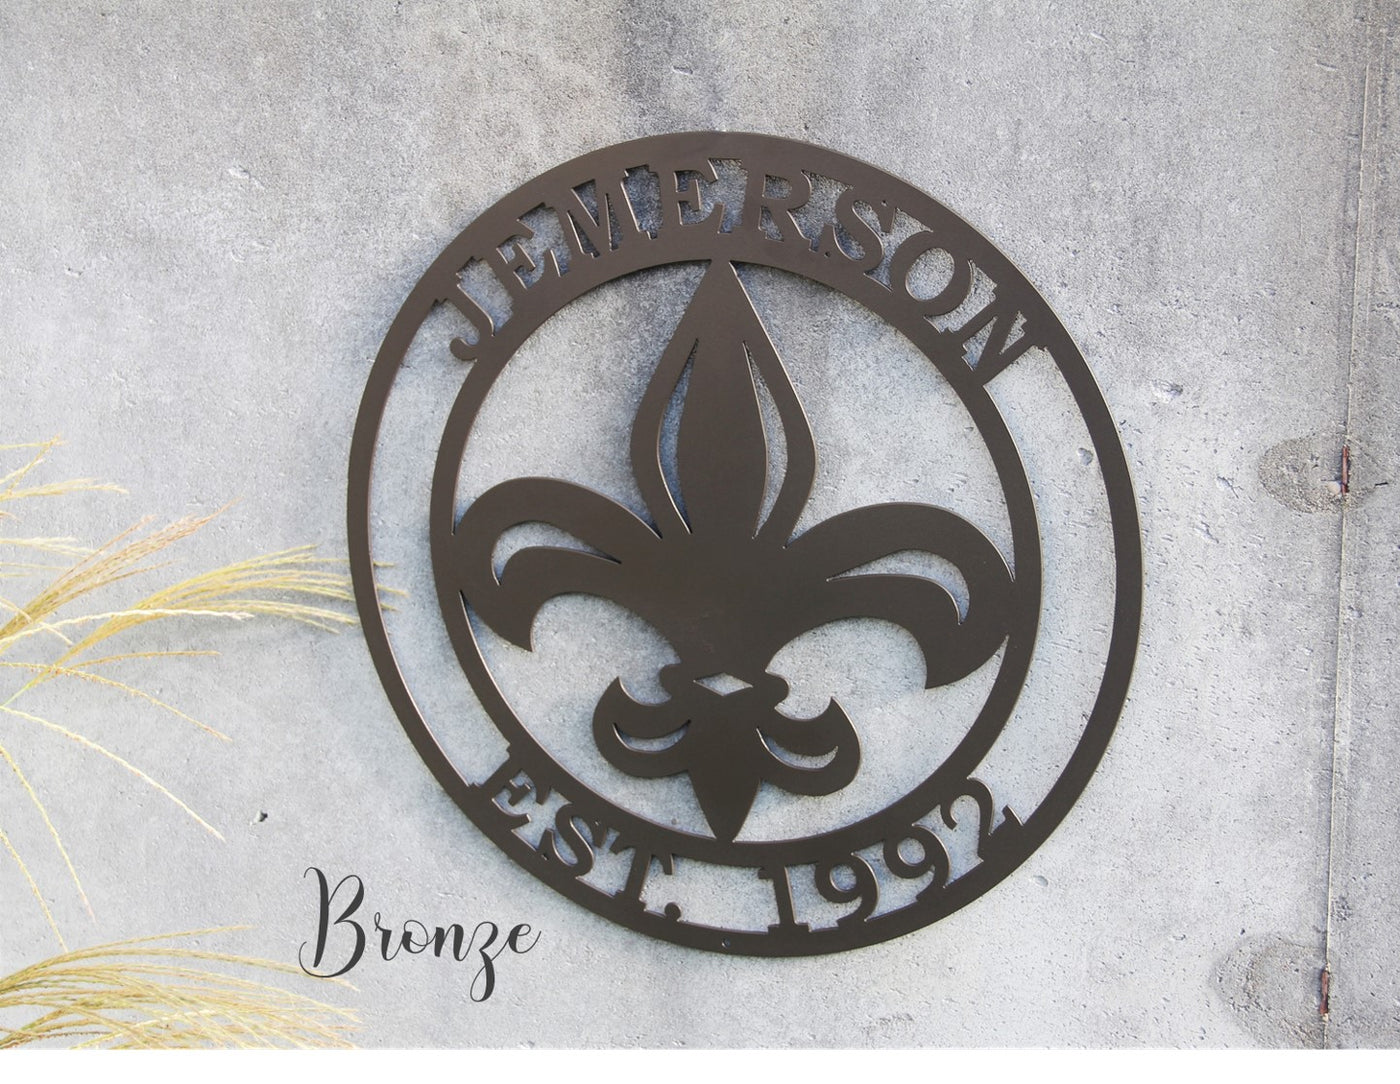 Personalized Fleur De Lis Family Sign - Madison Iron and Wood - Personalized sign - metal outdoor decor - Steel deocrations - american made products - veteran owned business products - fencing decorations - fencing supplies - custom wall decorations - personalized wall signs - steel - decorative post caps - steel post caps - metal post caps - brackets - structural brackets - home improvement - easter - easter decorations - easter gift - easter yard decor